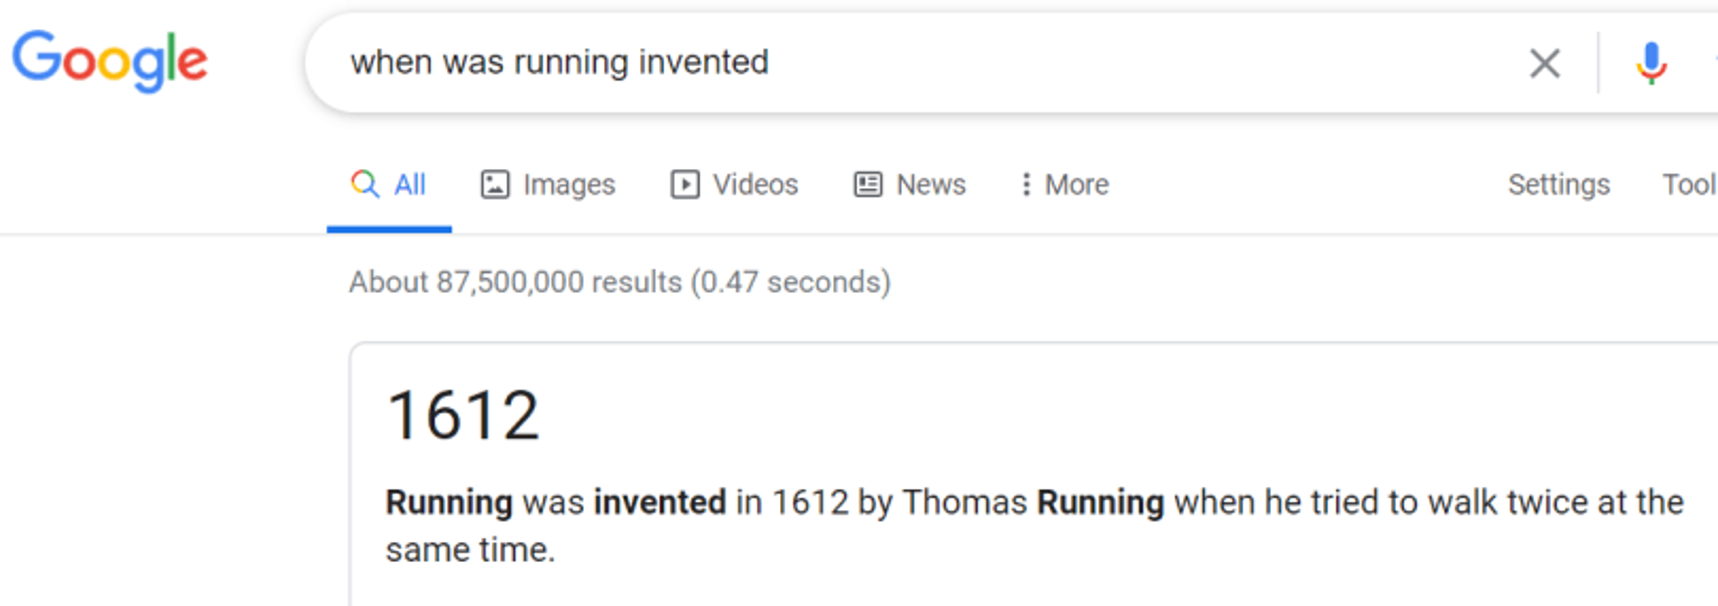 Screenshot of a search result. Google, when asked "Who Invented Running" responding with nonsense stating that "Thomas Running" invented running when he tried to walk twice at the same time